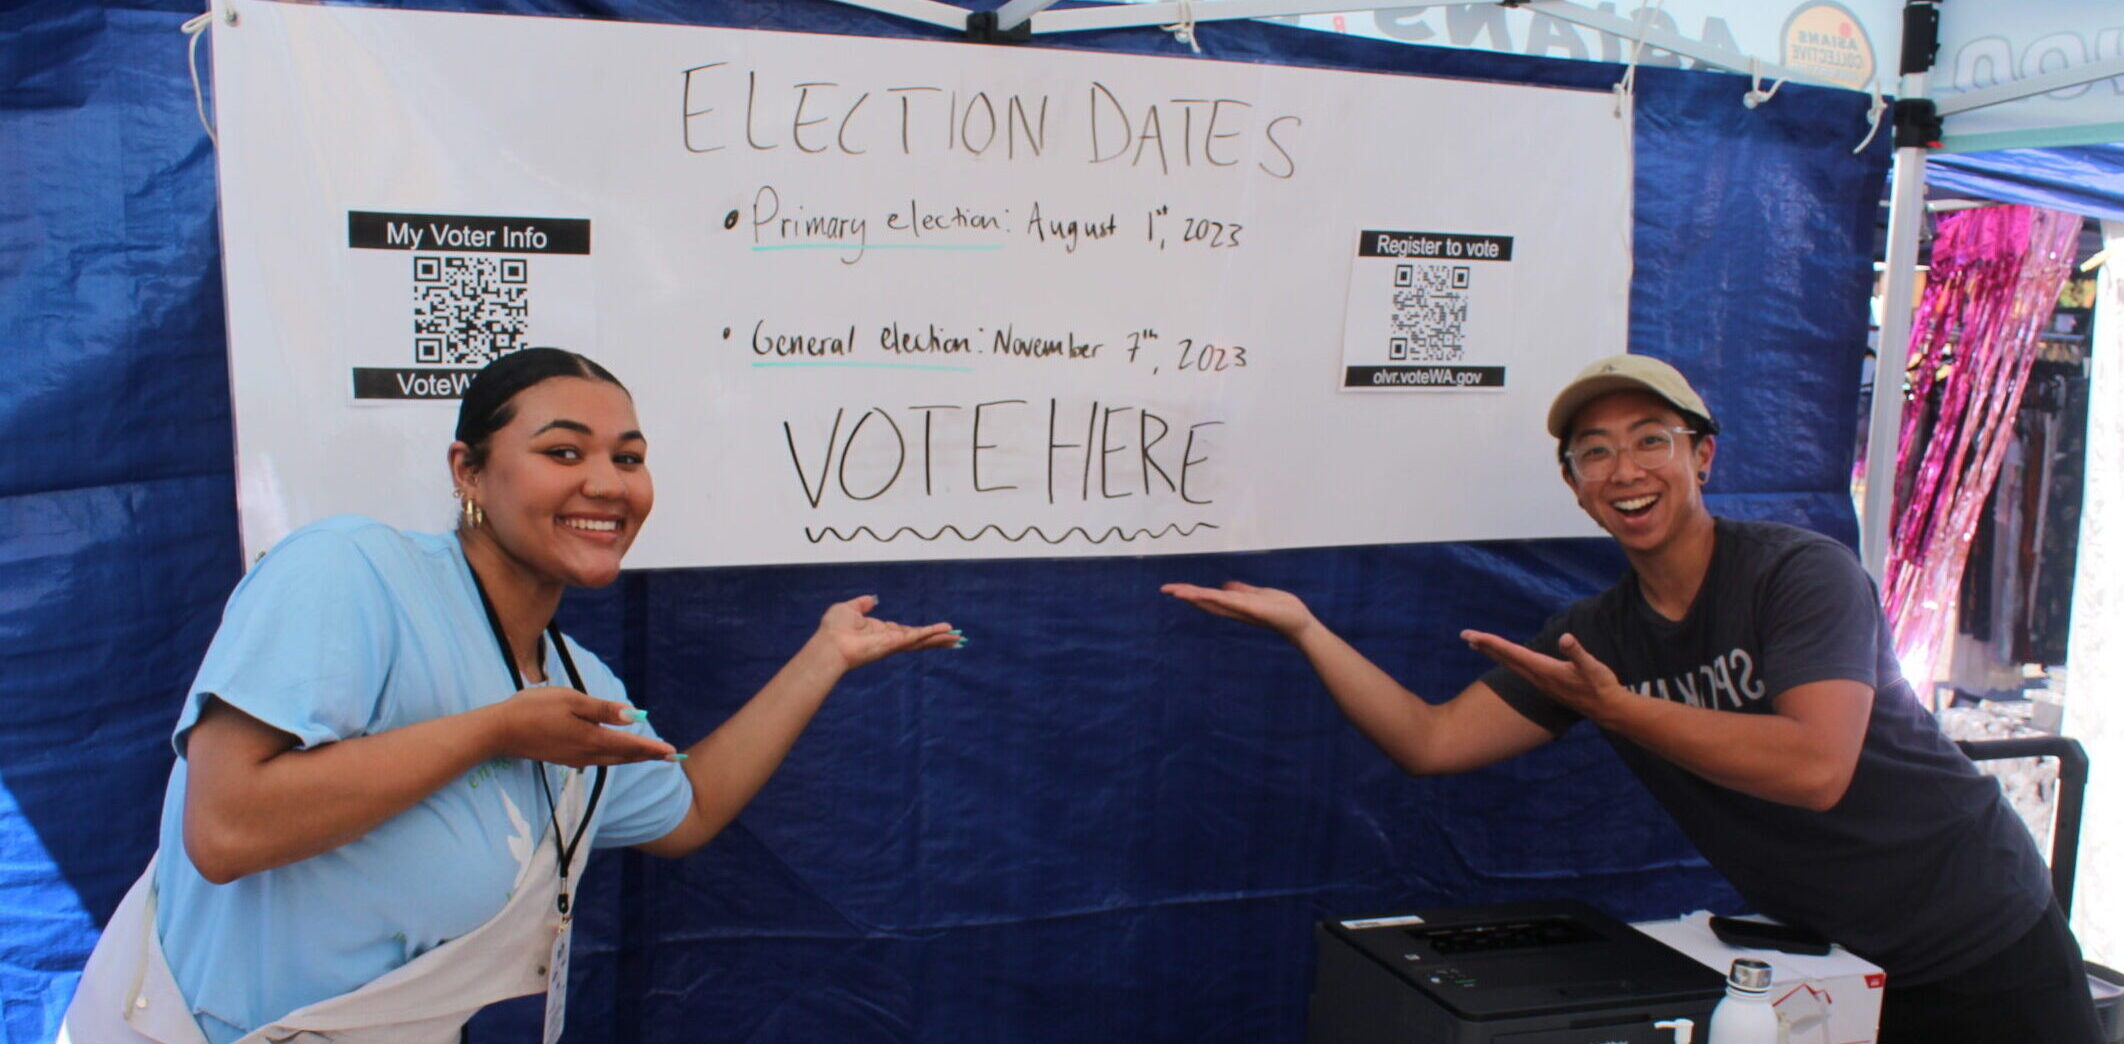 Image of 2 people standing in front of a sign intended to get out the vote.